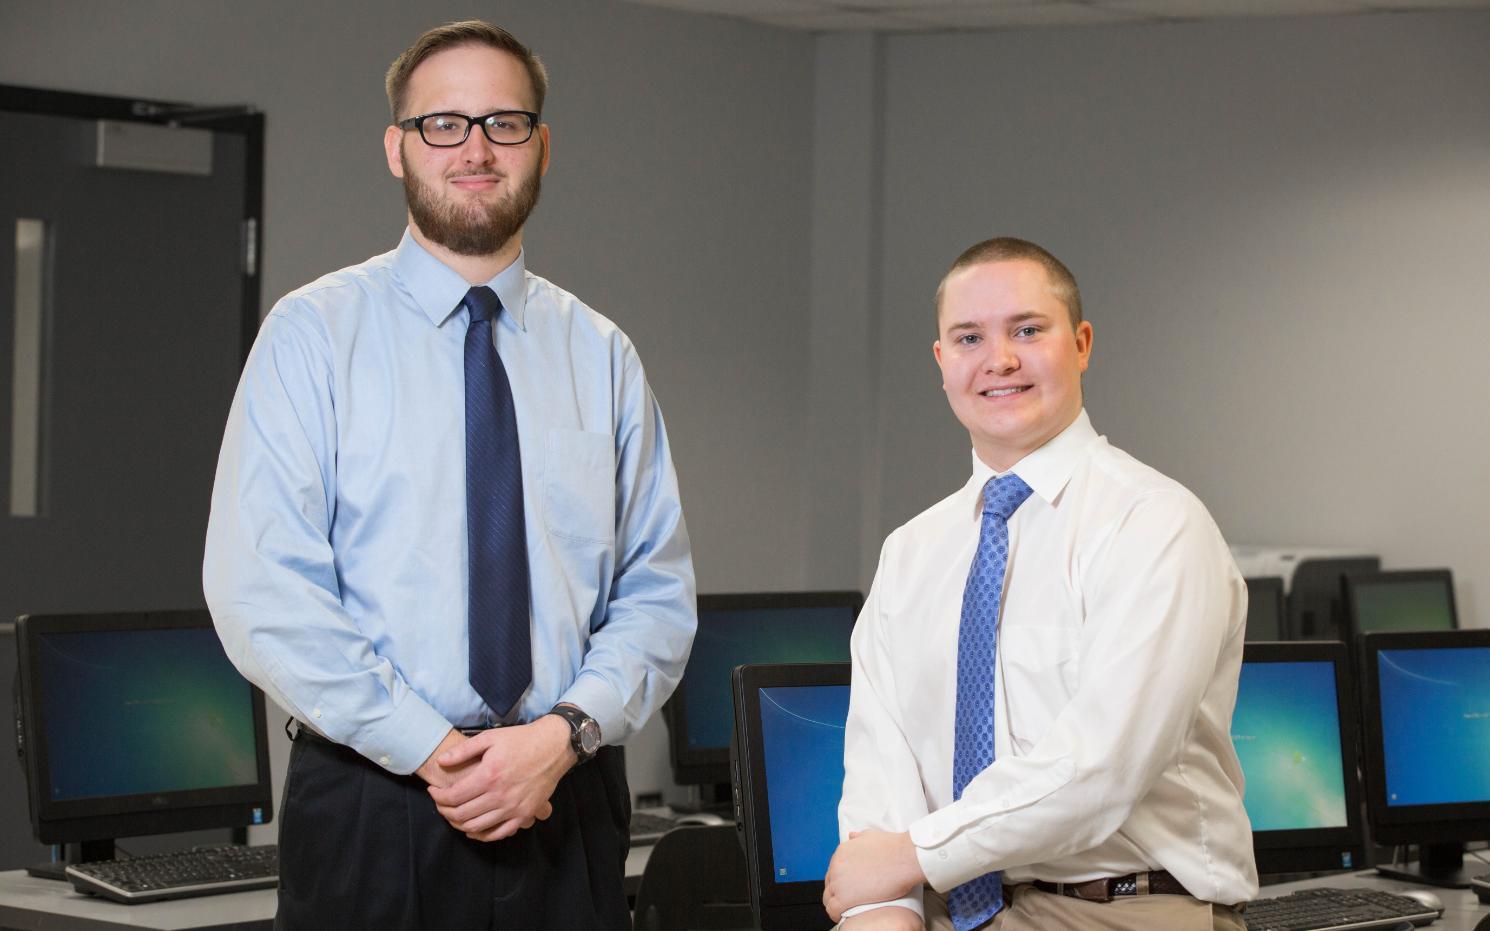 Cyber security scholarships that Tyler Chuba ’18 (left) and Michael Moore ’18 recently received from the state will aid their career plans.